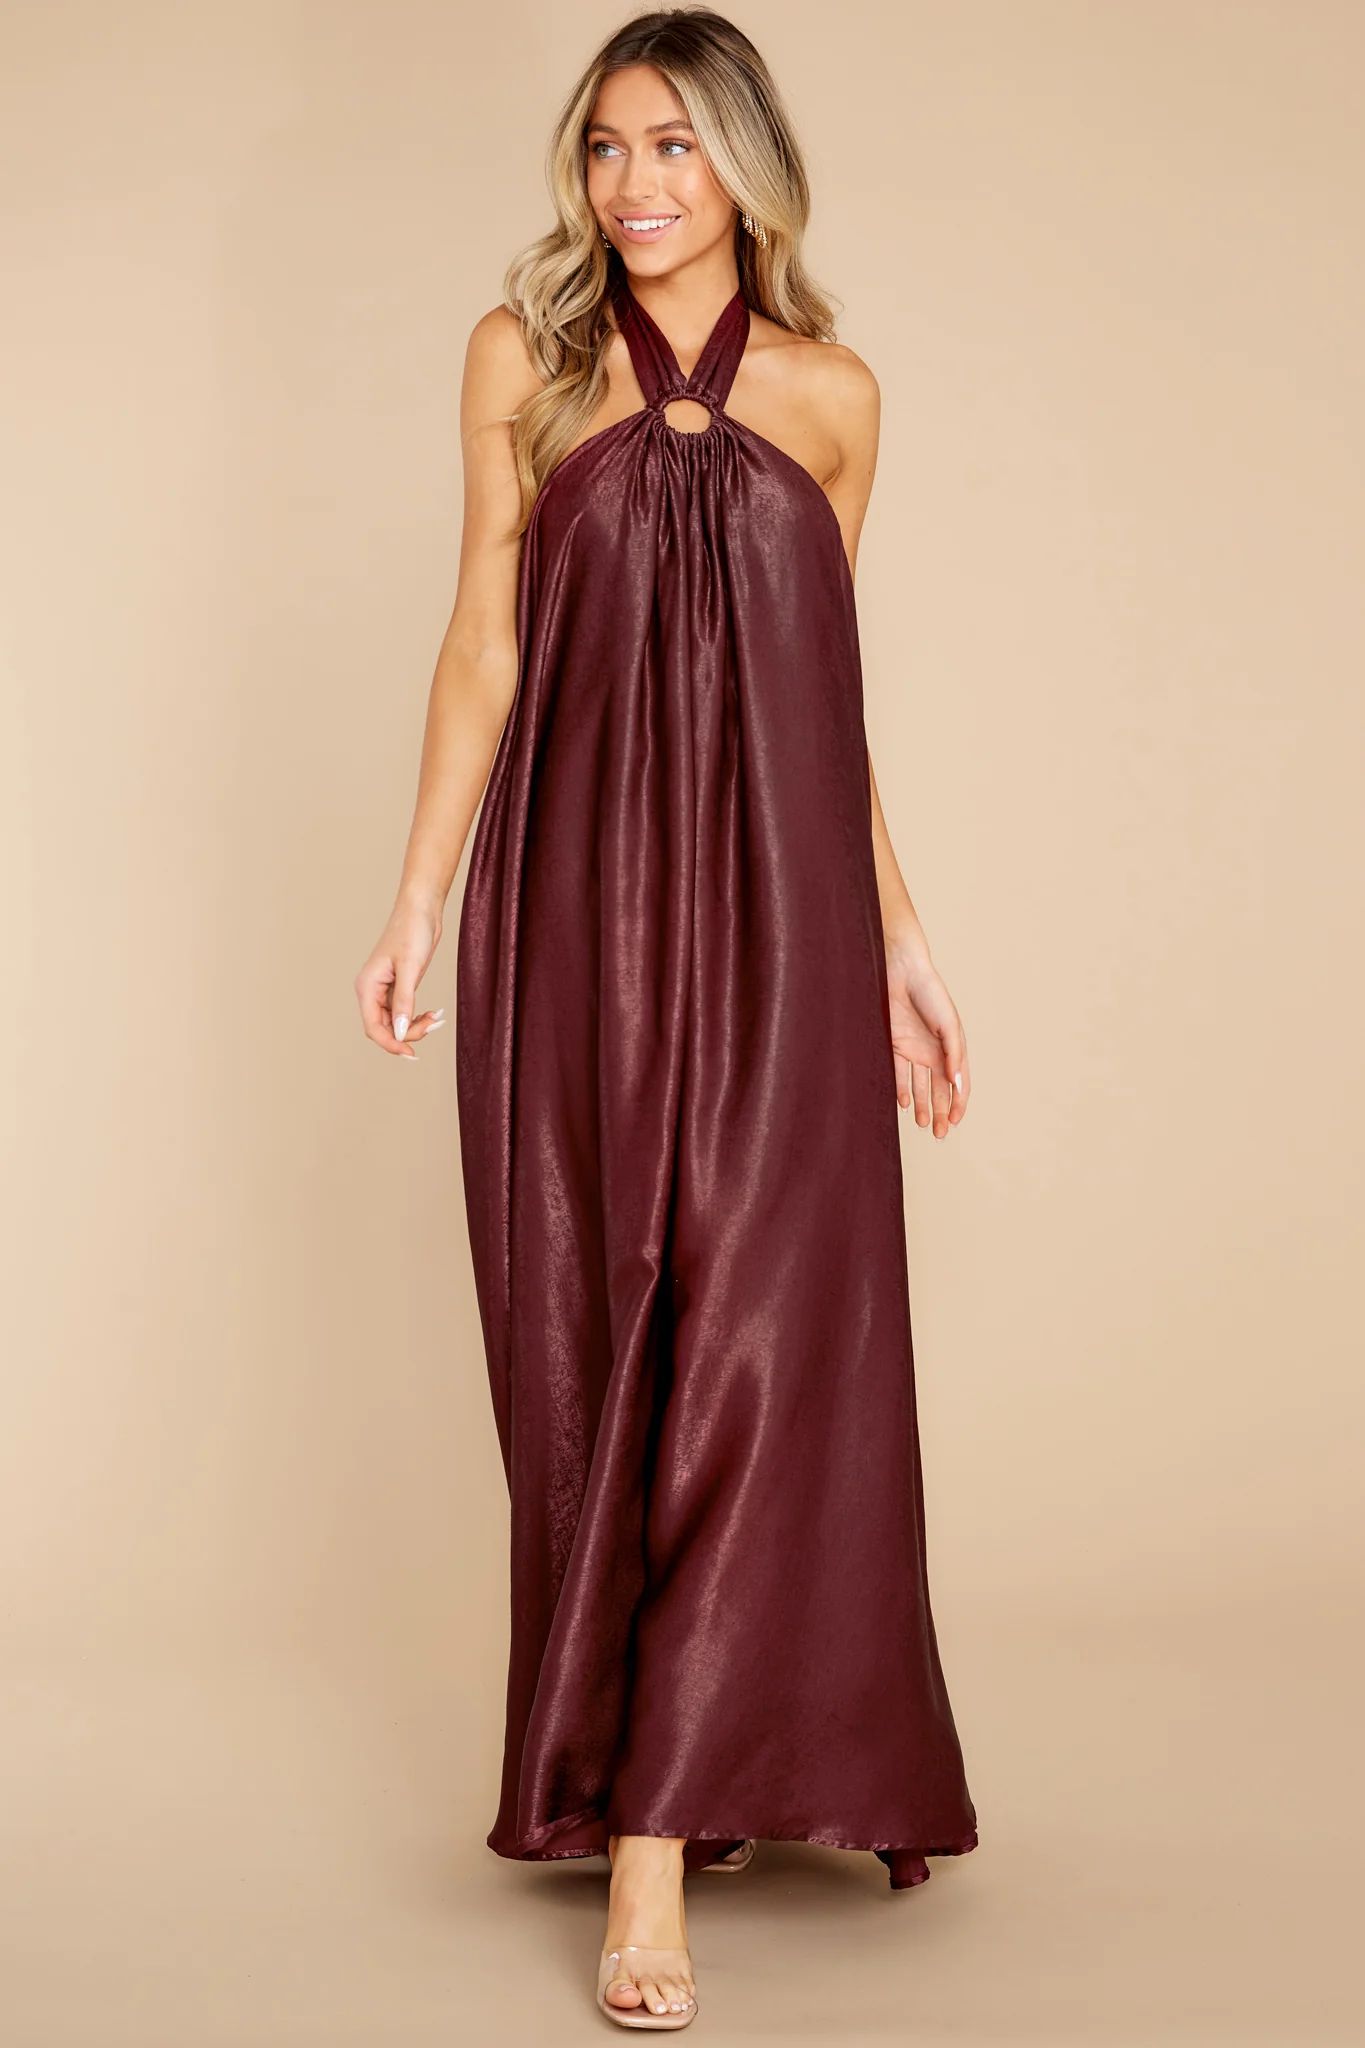 Covered By Love Dark Wine Maxi Dress | Red Dress 